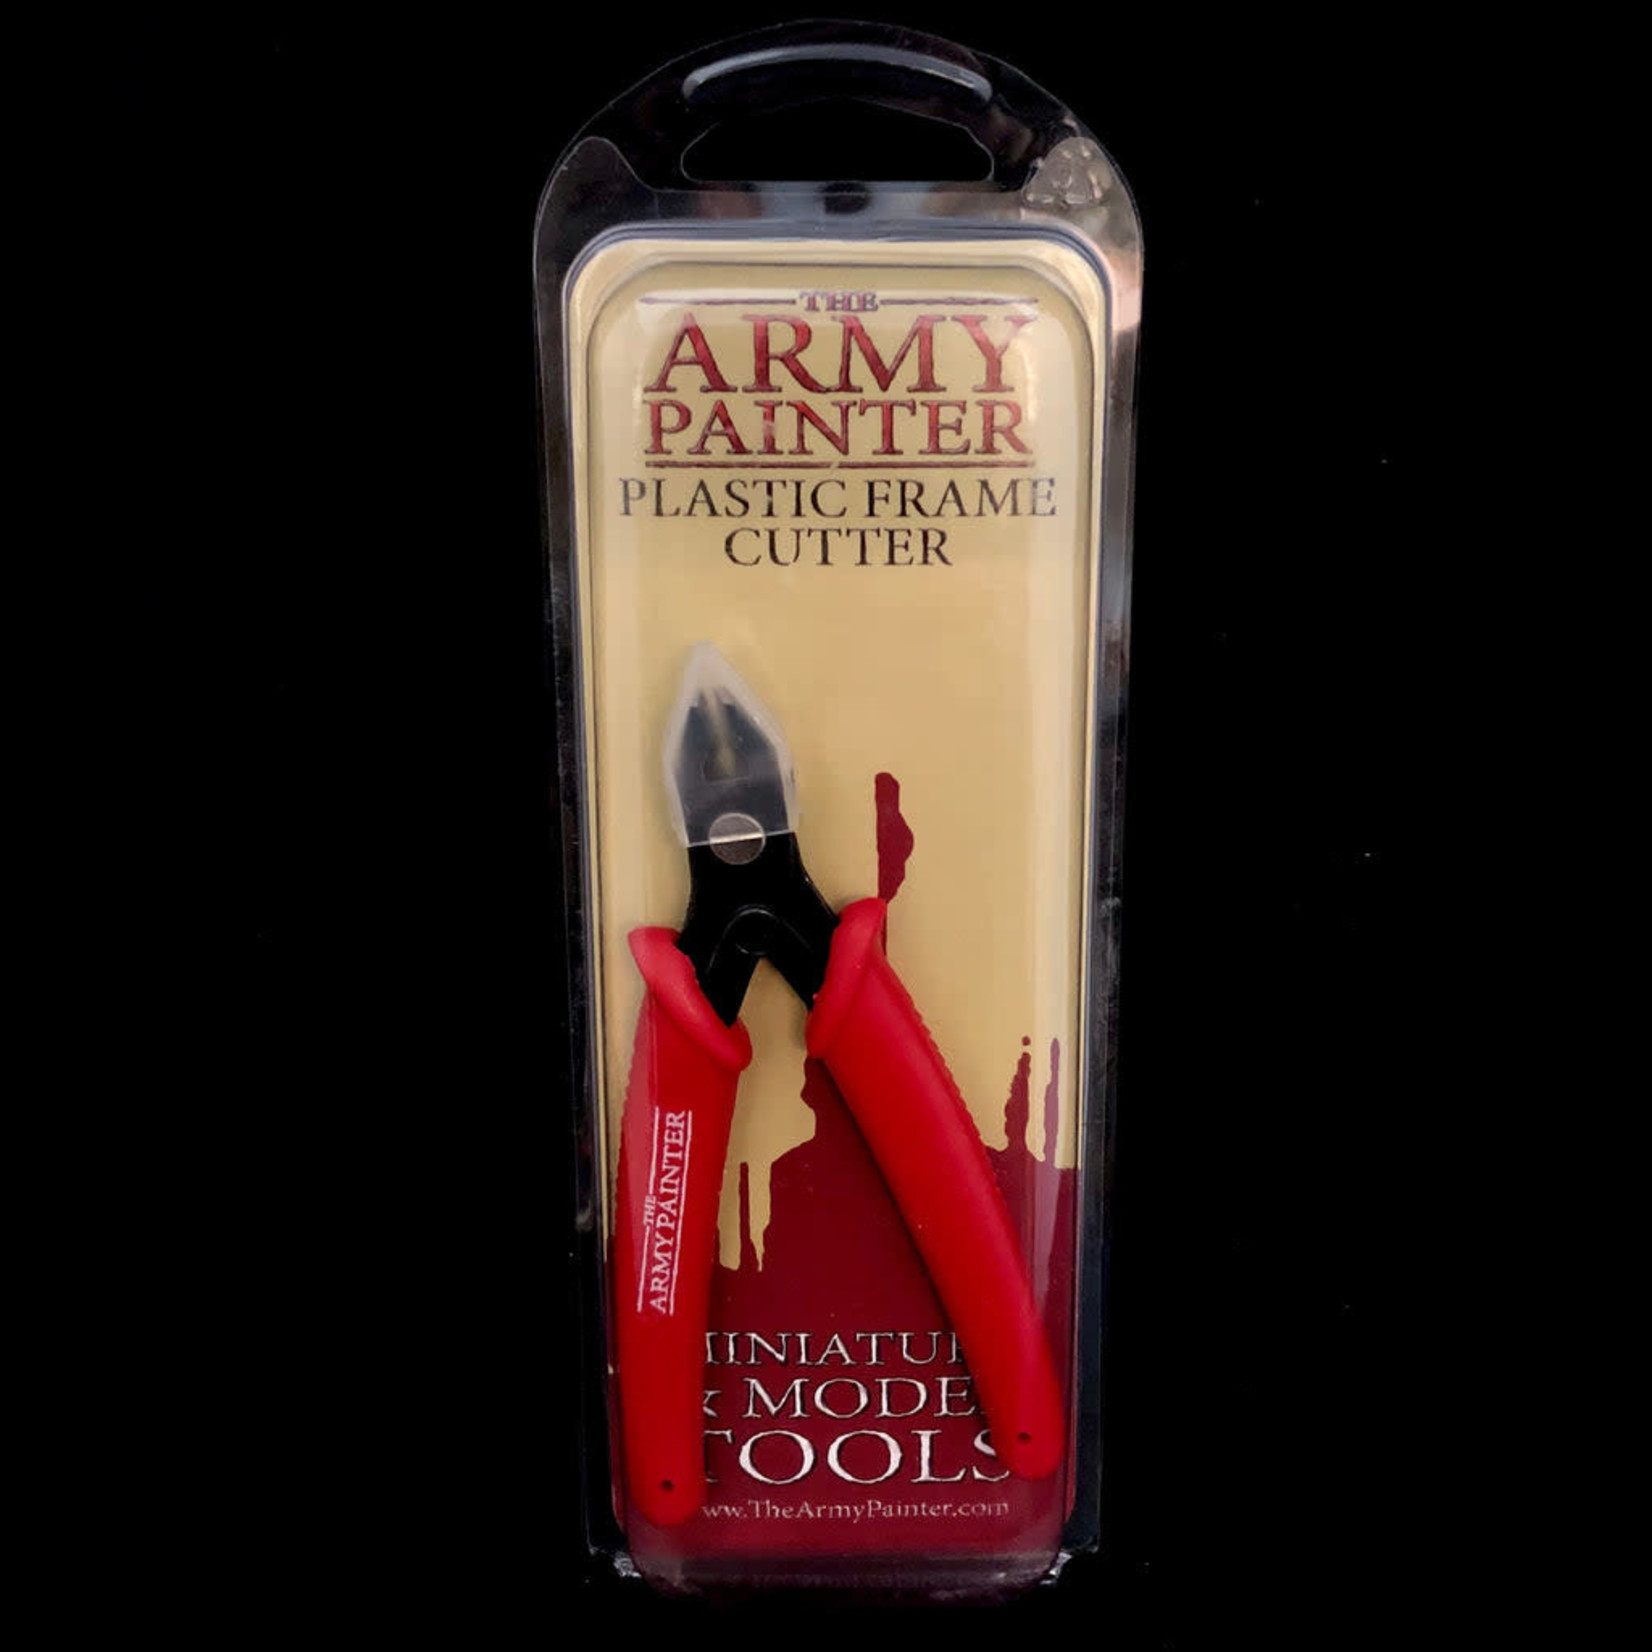 The Army Painter The Army Painter Plastic Frame Cutters